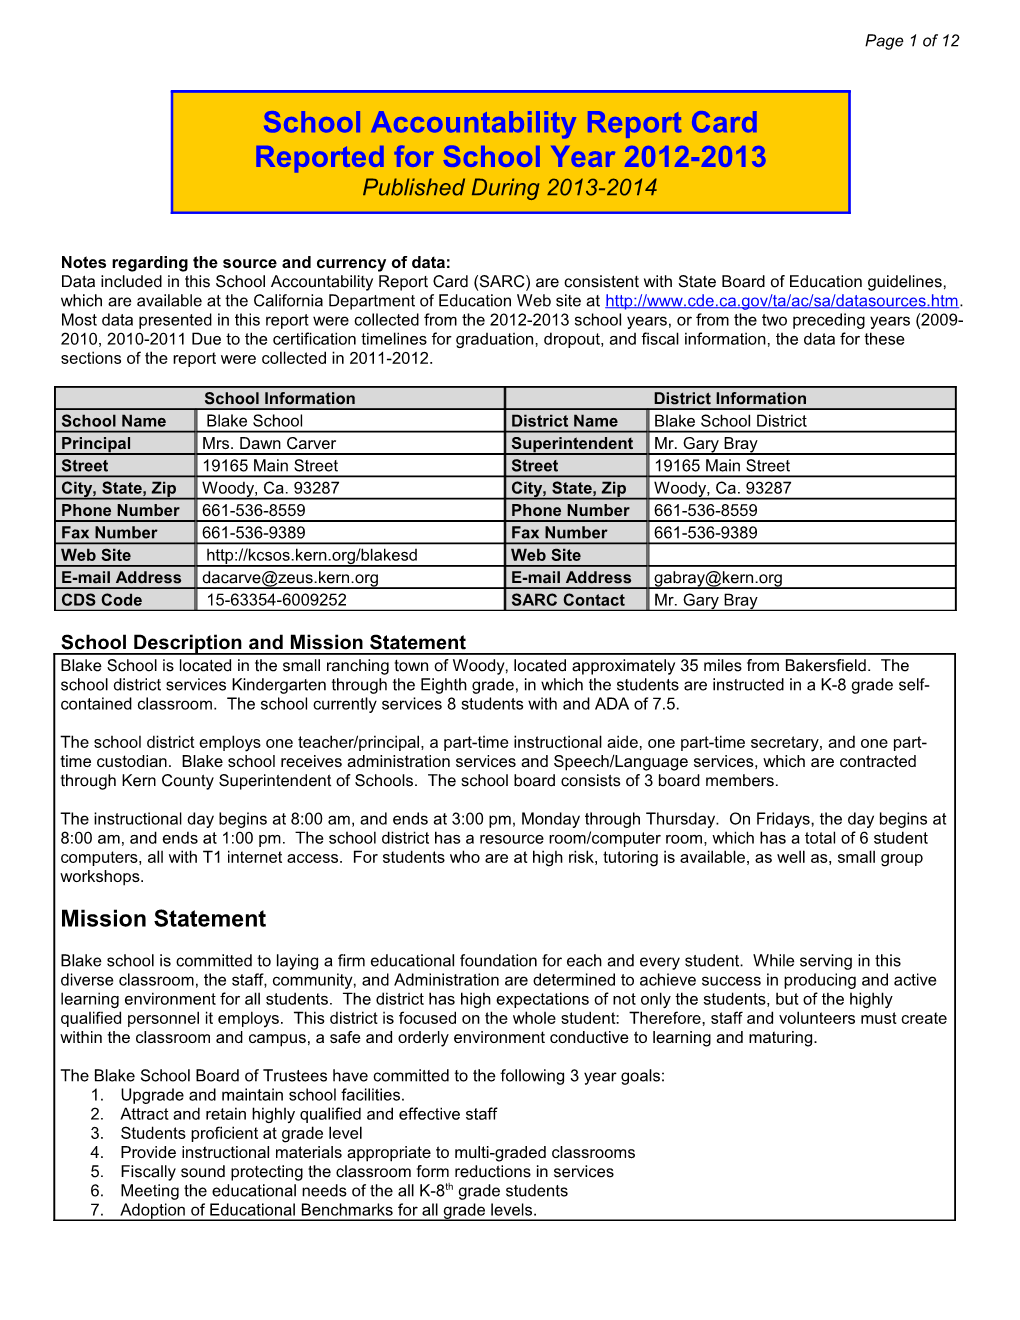 2002-03 SARC Template (In Word) - School Accountability Report Card (CA Dept of Education)